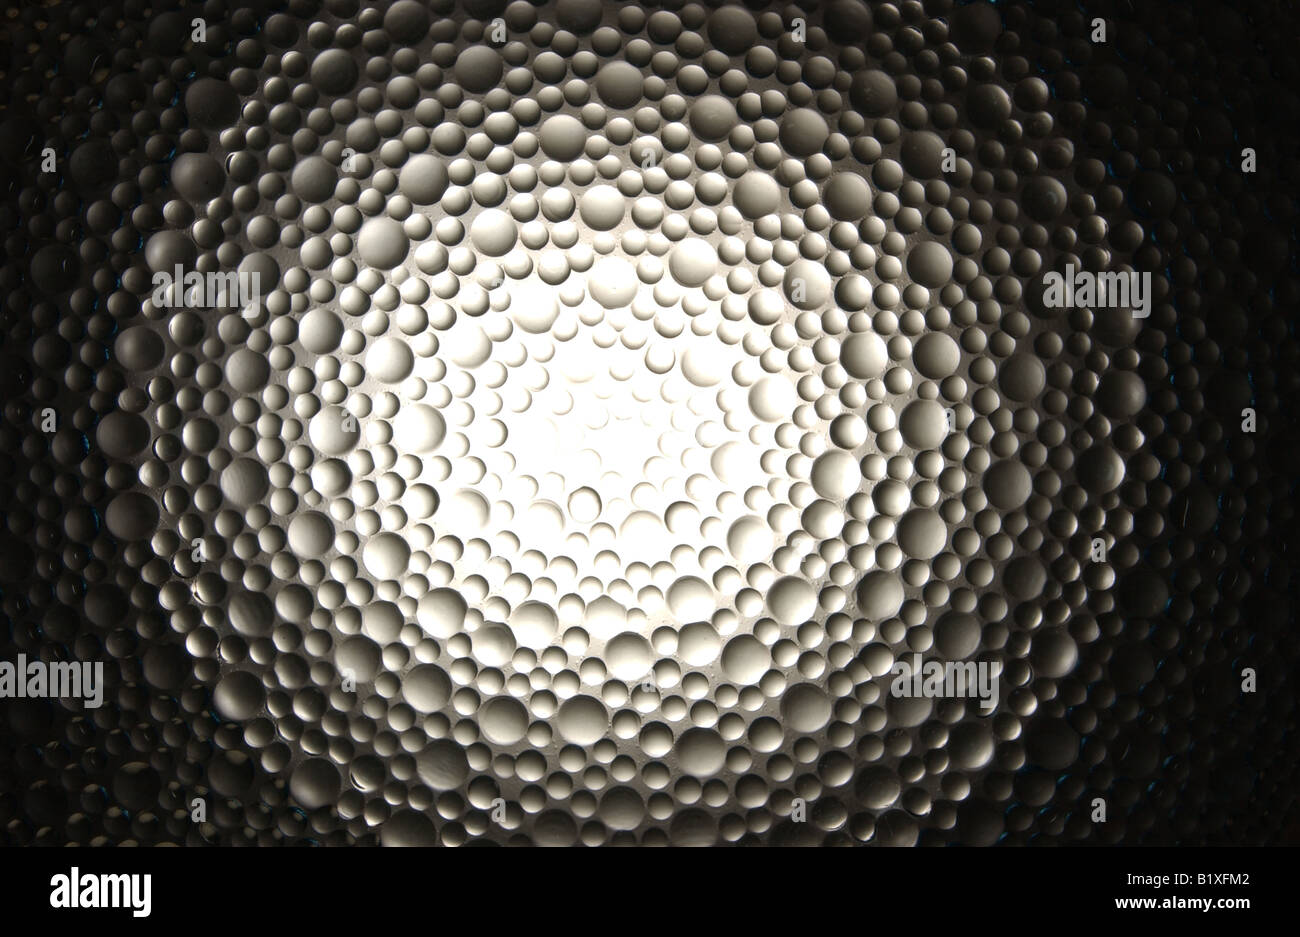 A round glowing spotlight section of glass bubbles. Stock Photo